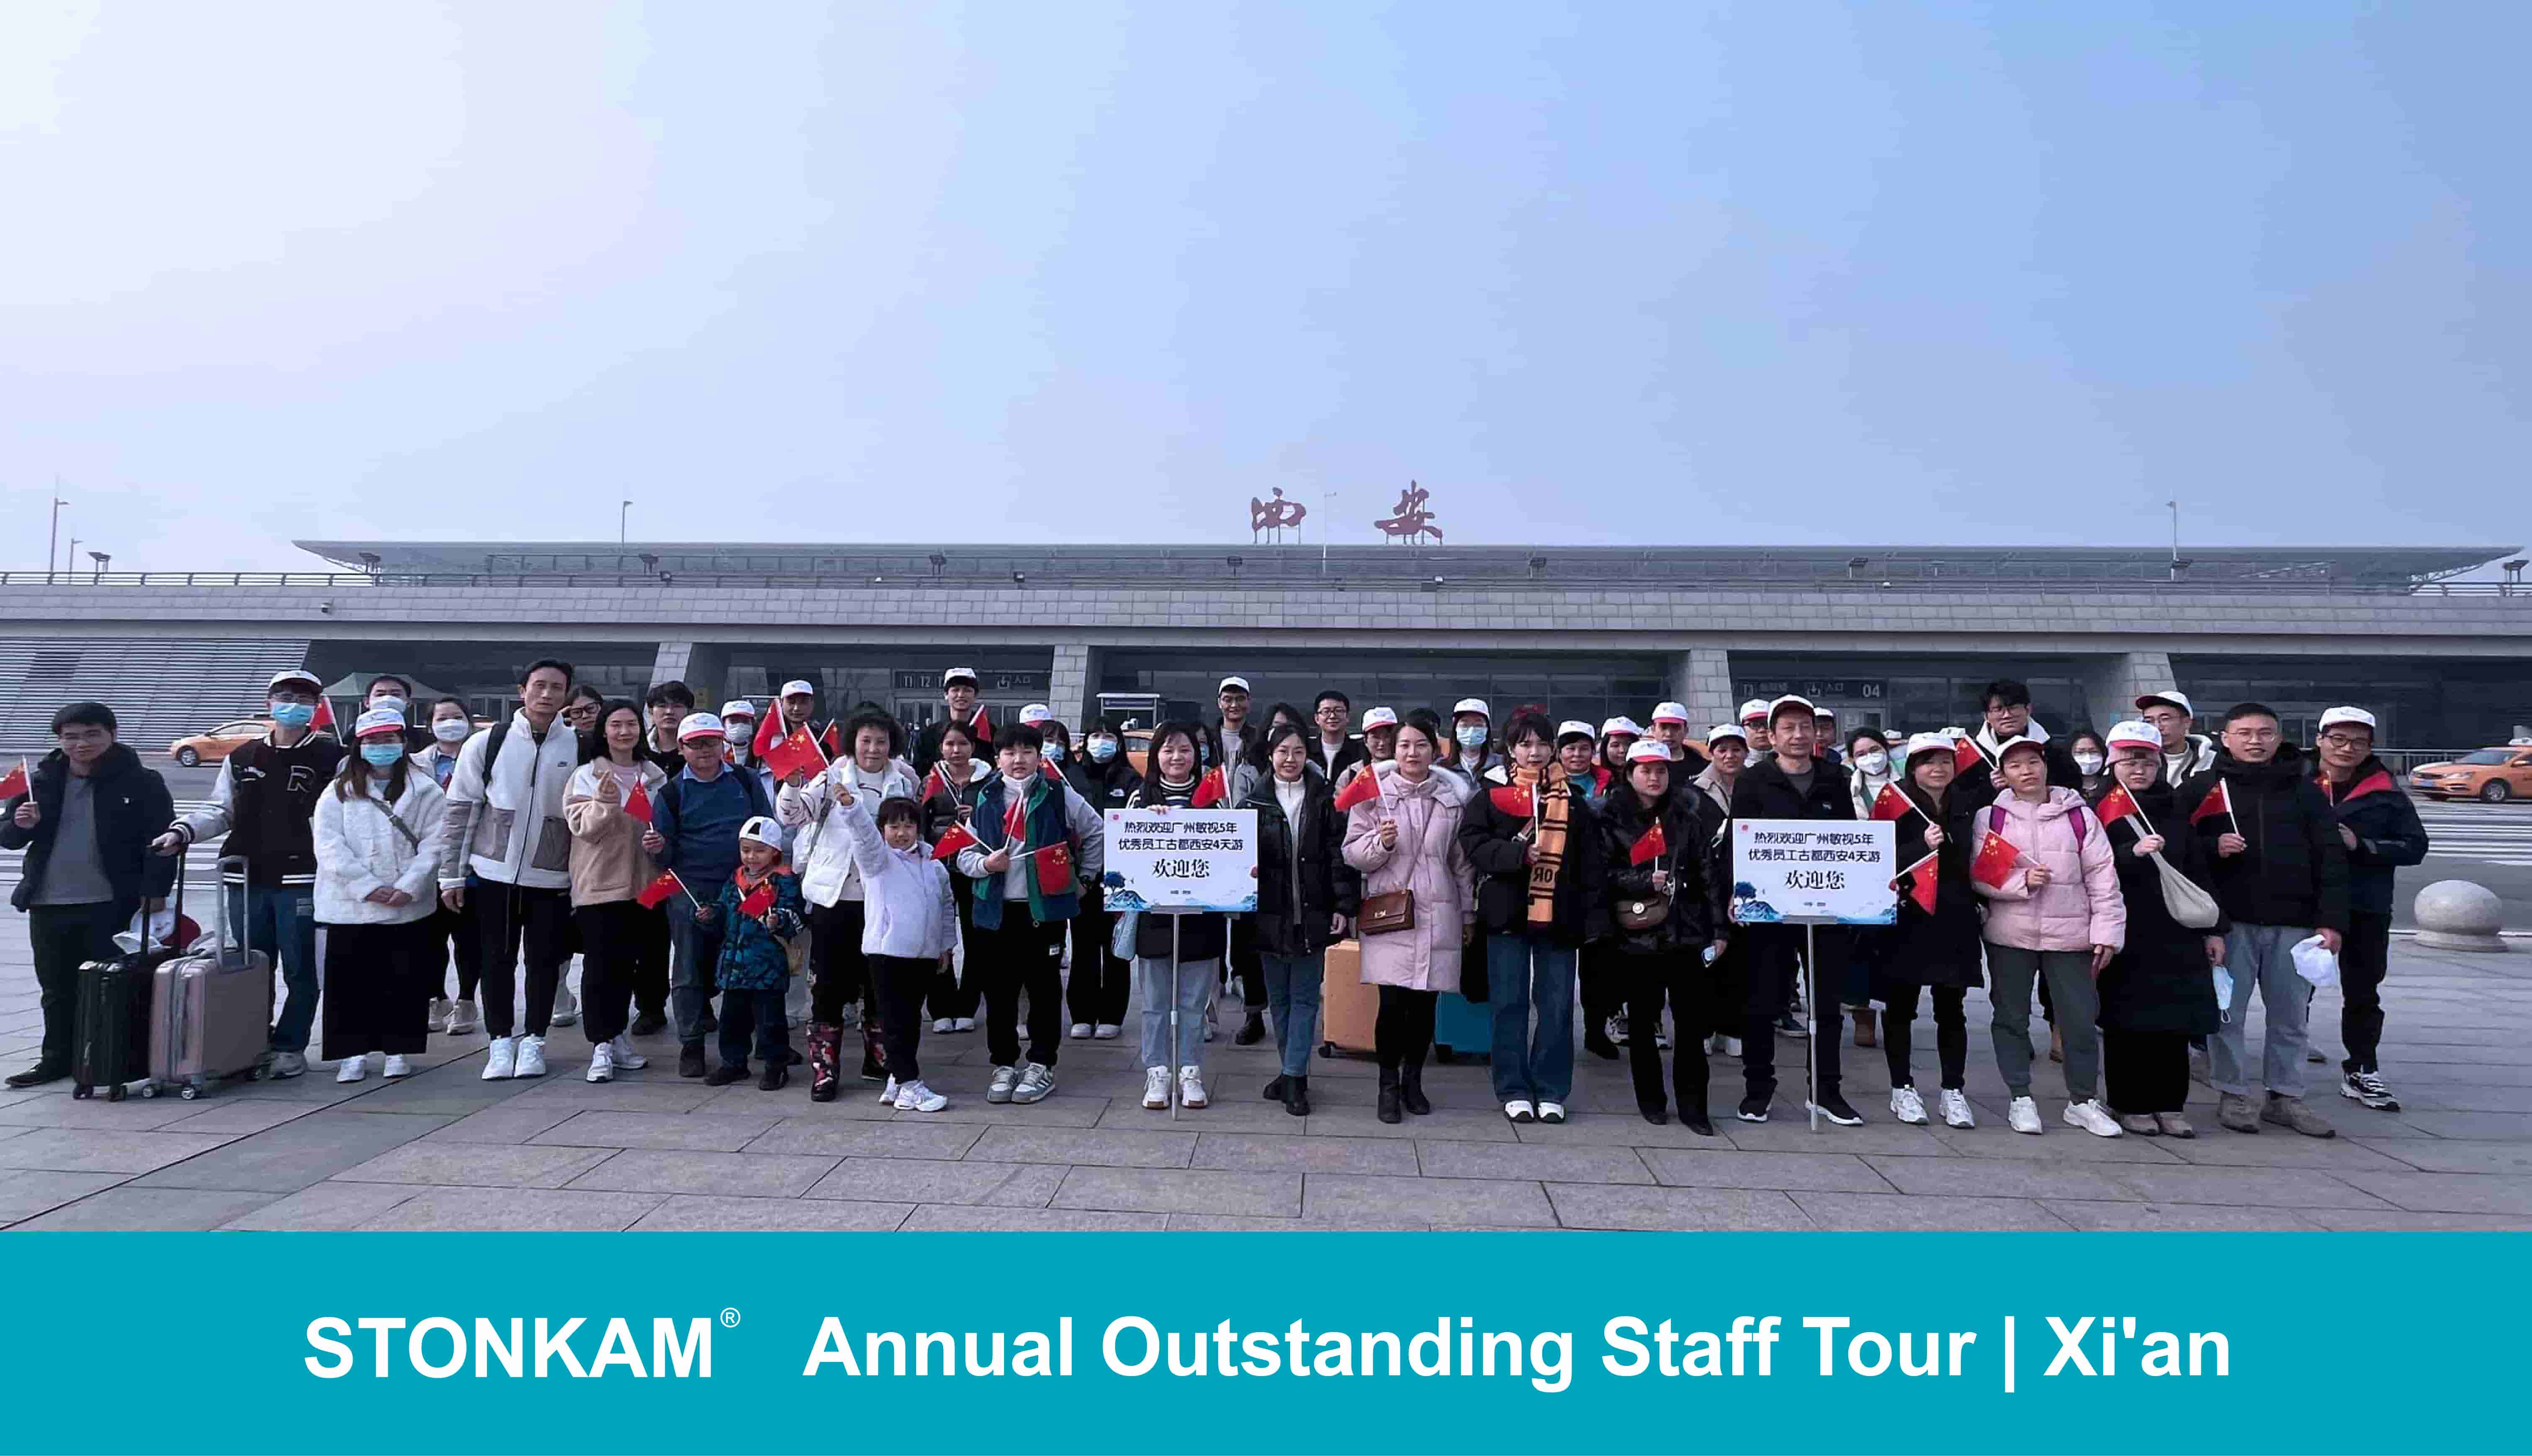 STONKAM Annual Outstanding Staff Tour | Xi'an